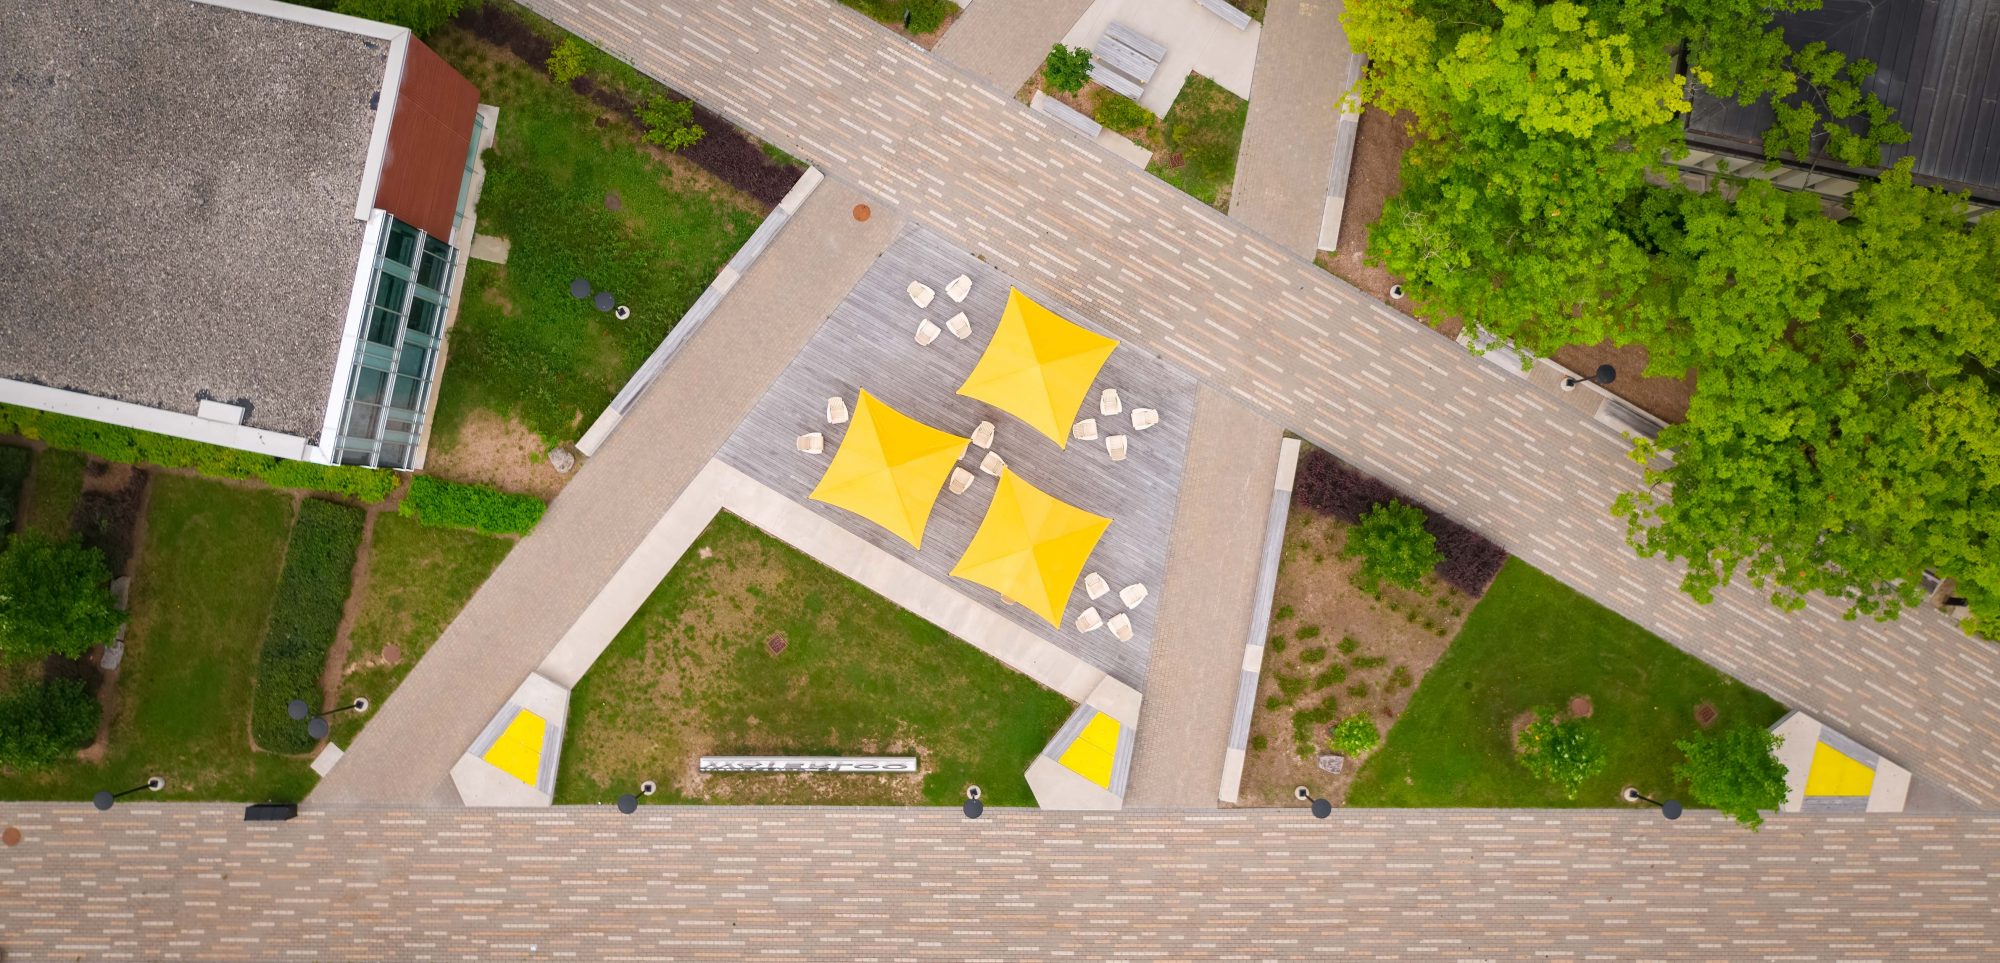 Aerial view of the University of Waterloo South Common grounds with a stones path in the shape of a letter A. Central to the image are three yellow umbrellas with seating.